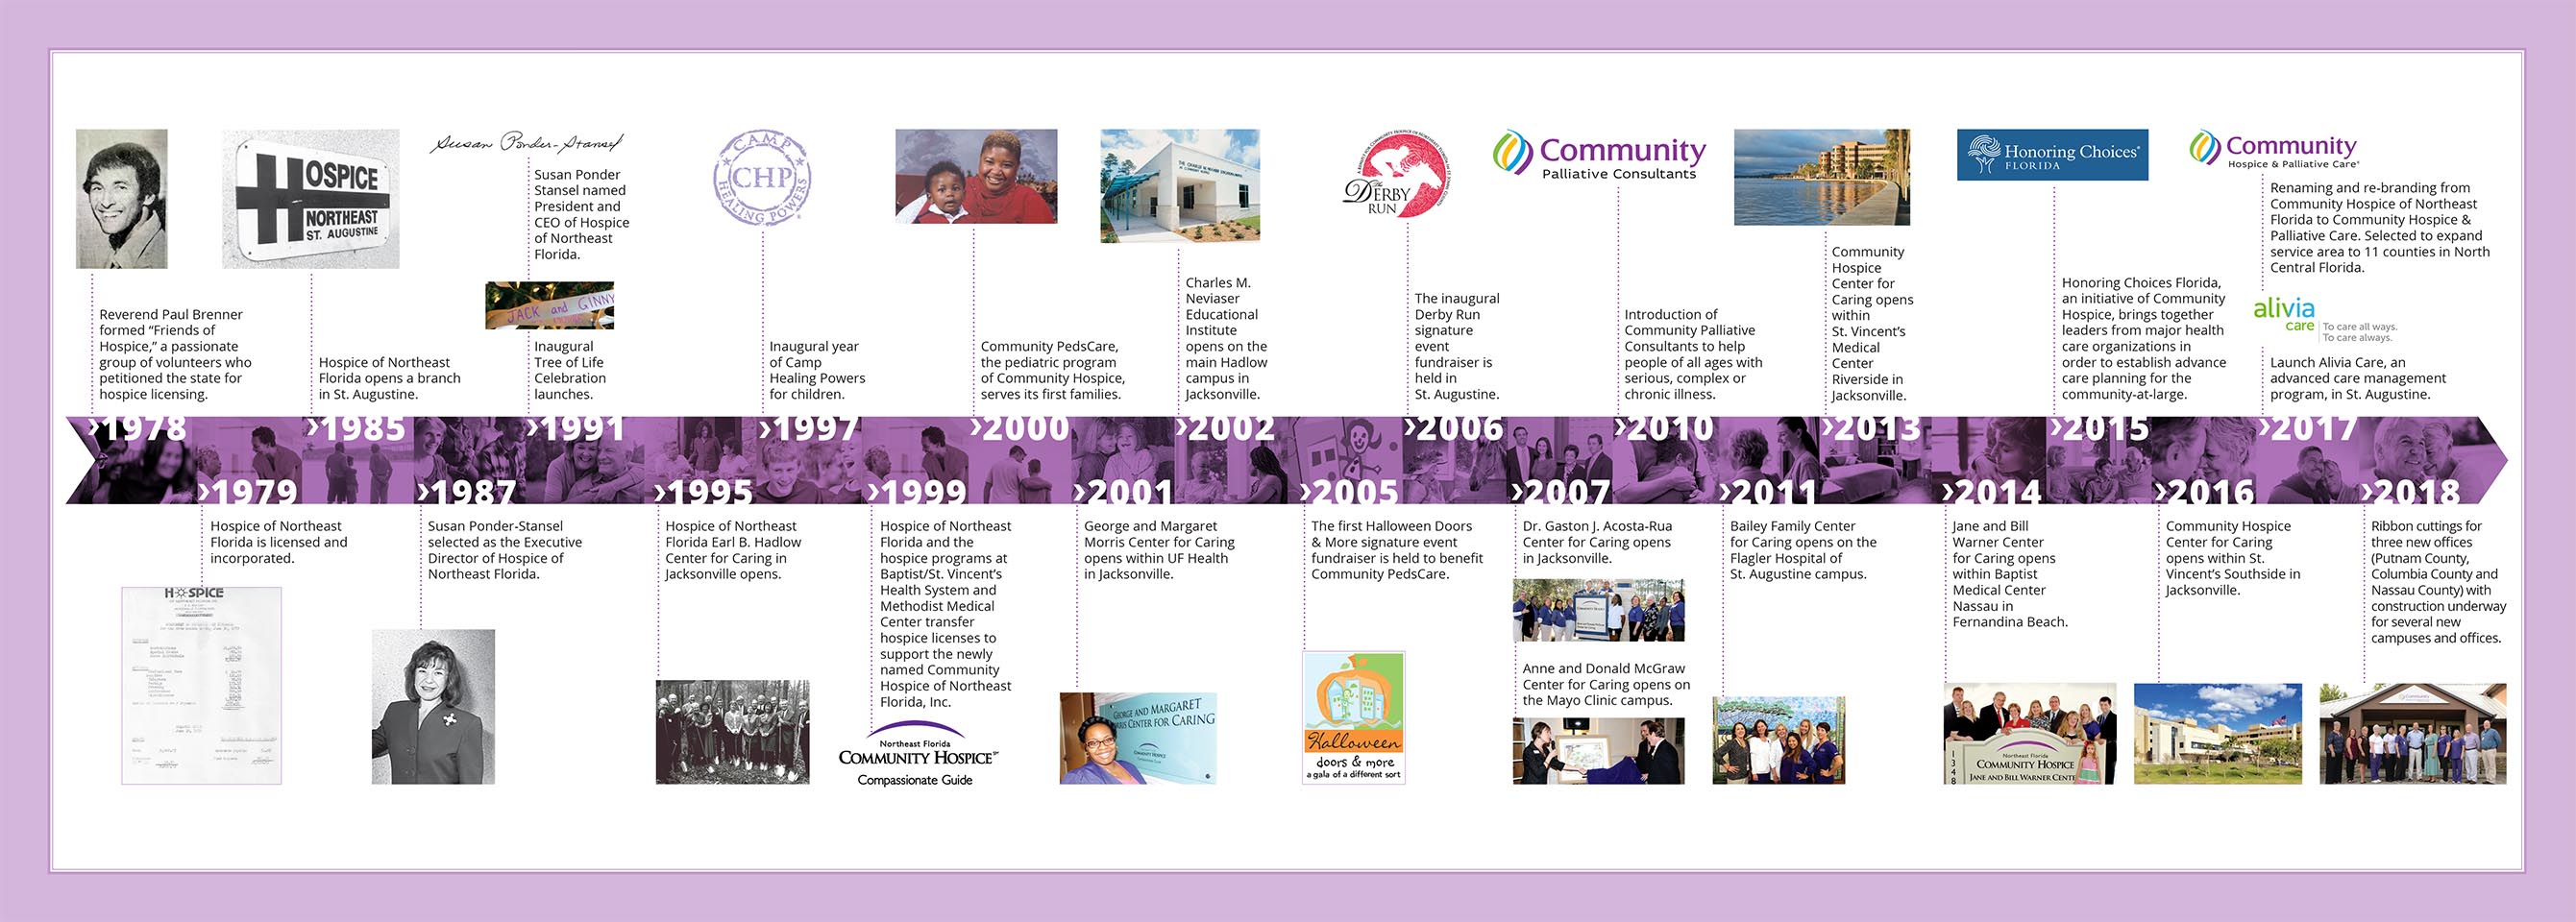 Community Hospice and Palliative Care 40th anniversary timeline